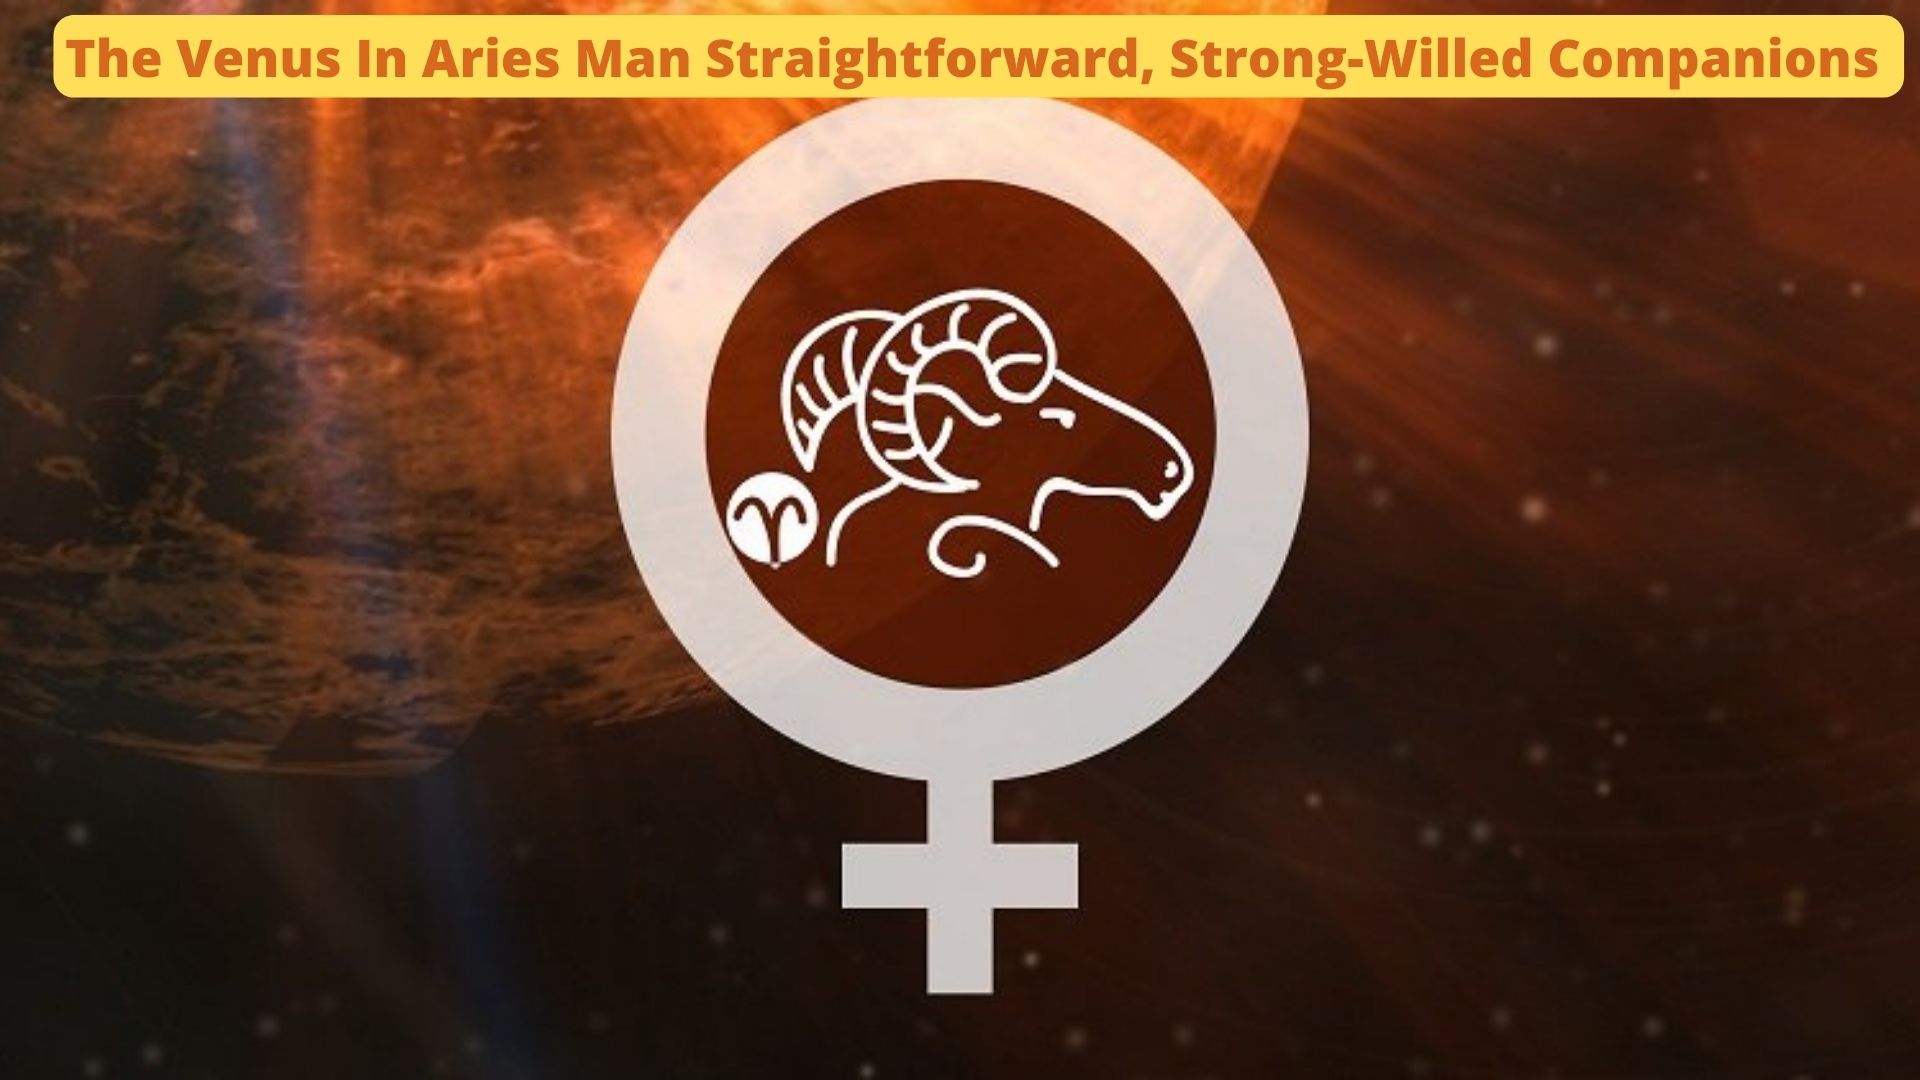 The Venus In Aries Man - Straightforward, Strong-Willed Companions